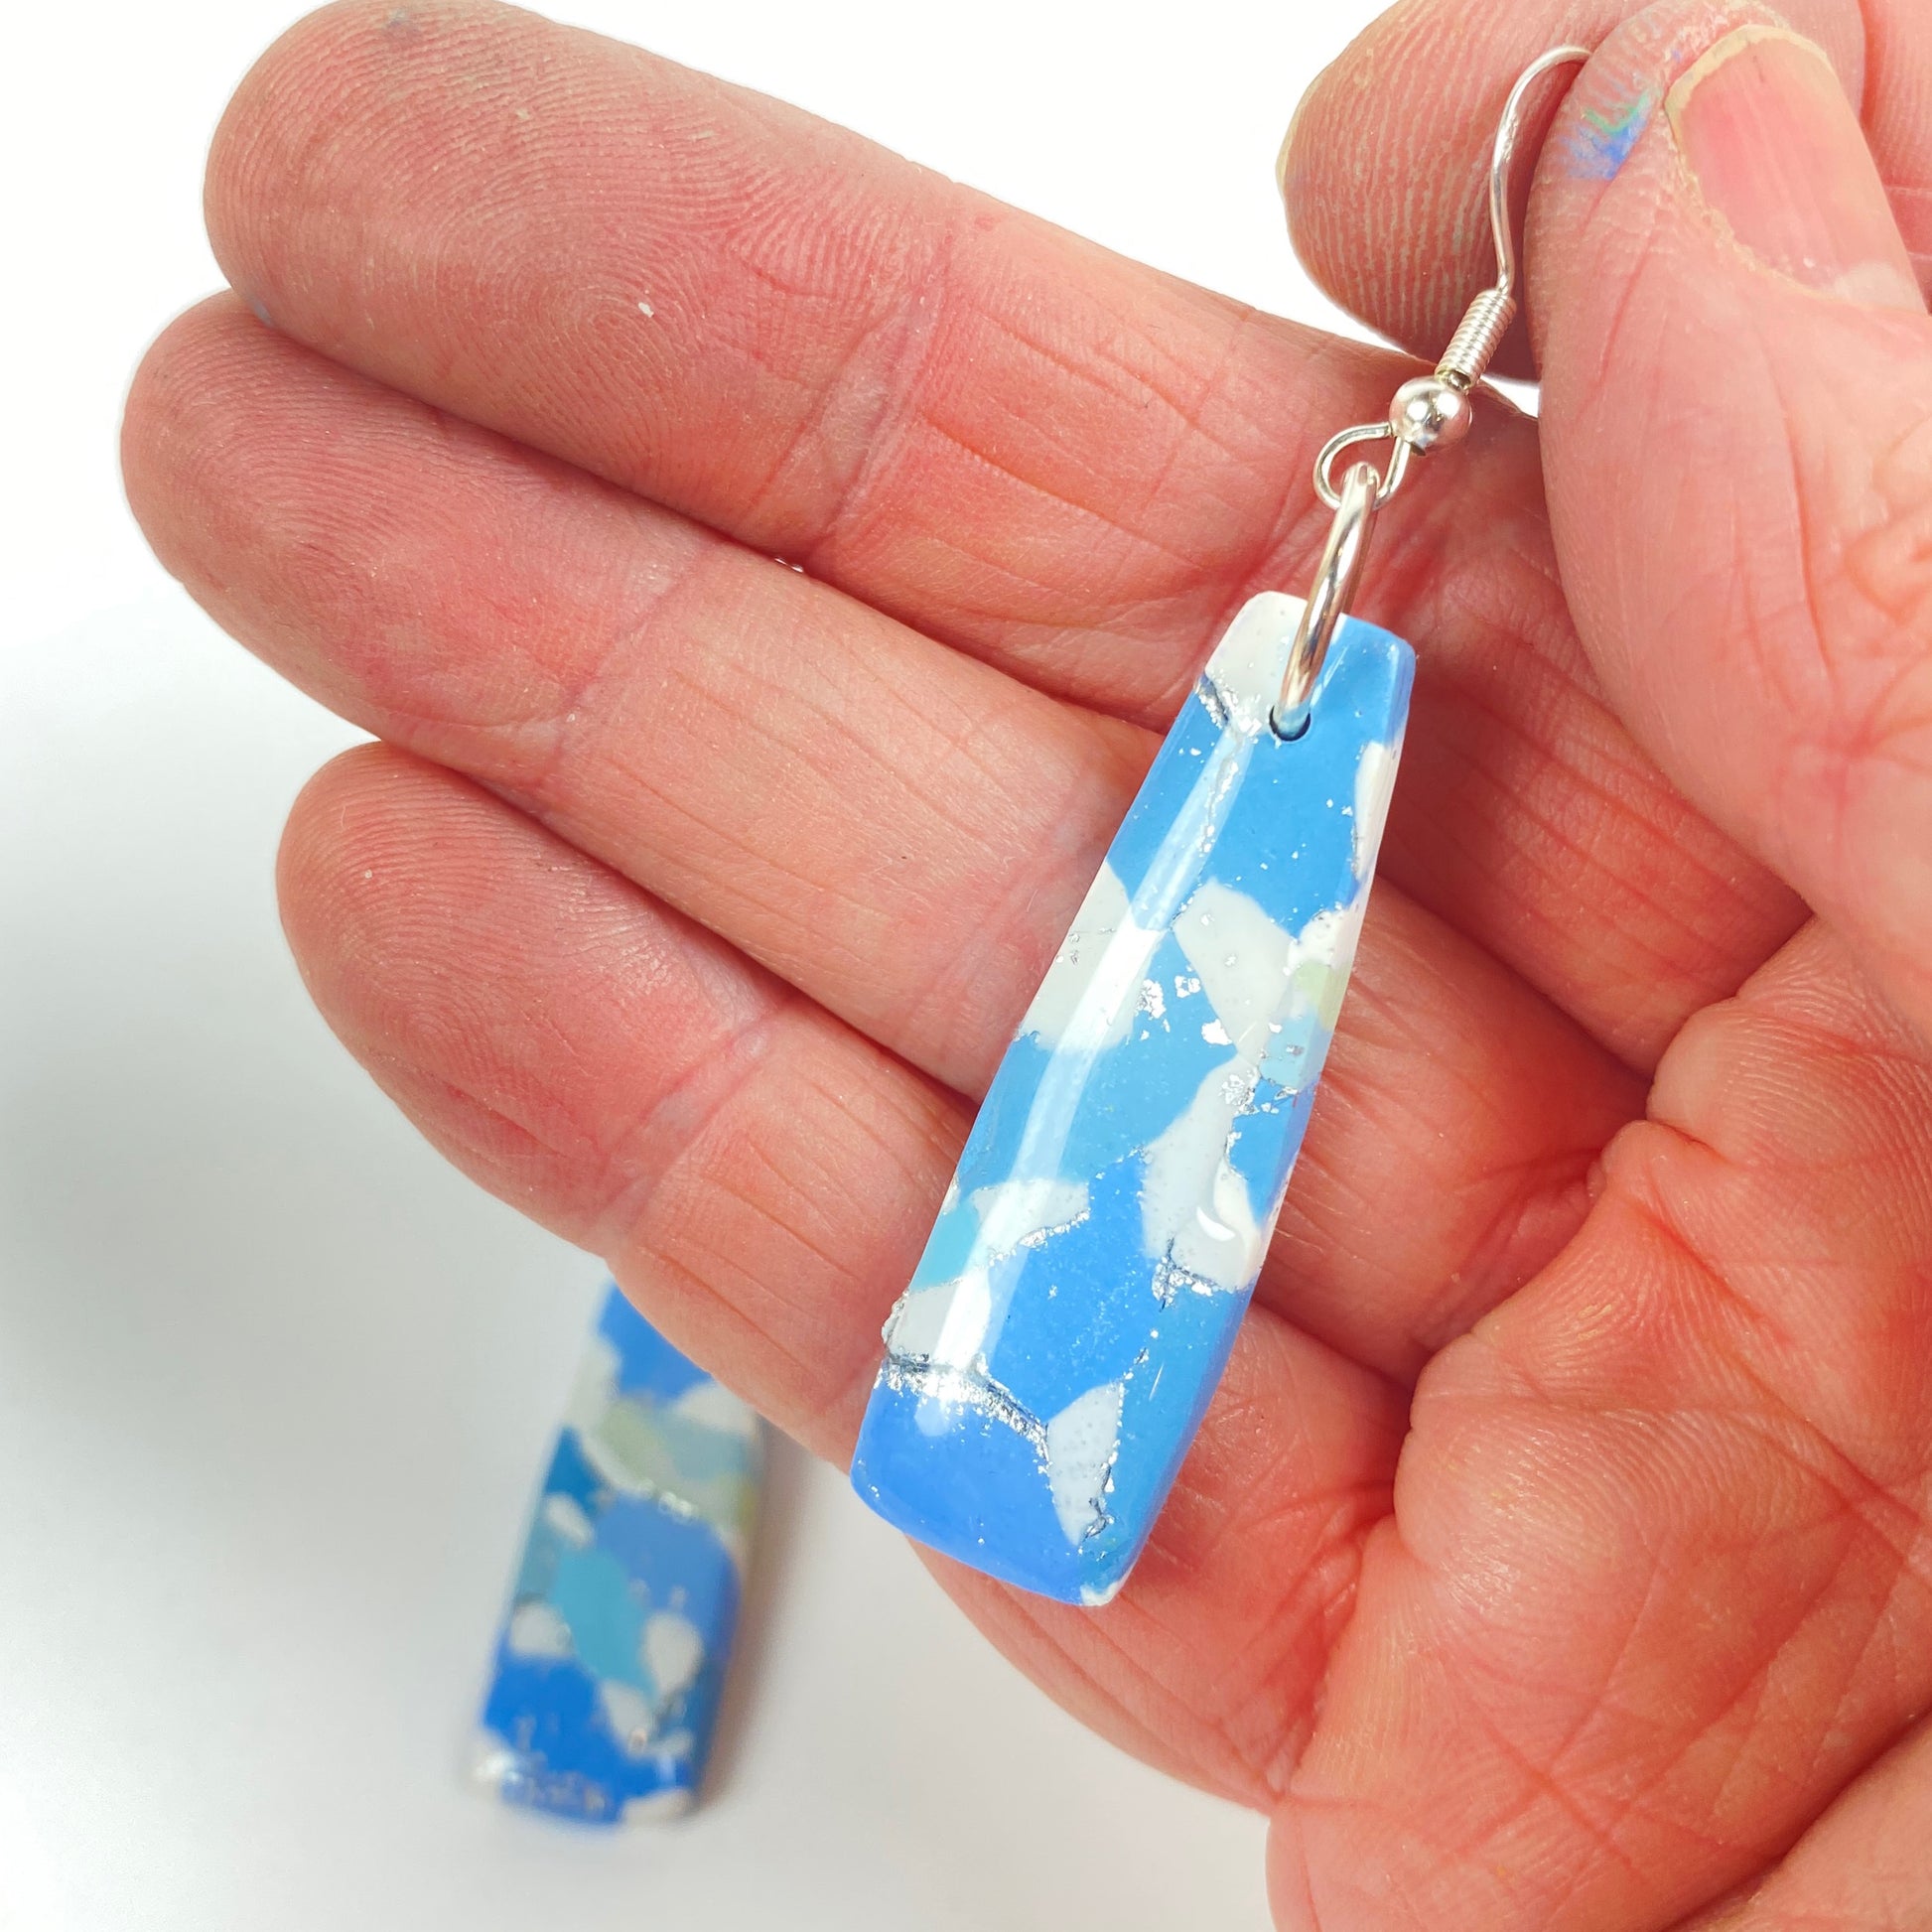 Moody Blues Handmade Polymer Clay Dangle Long Earrings handheld for size reference